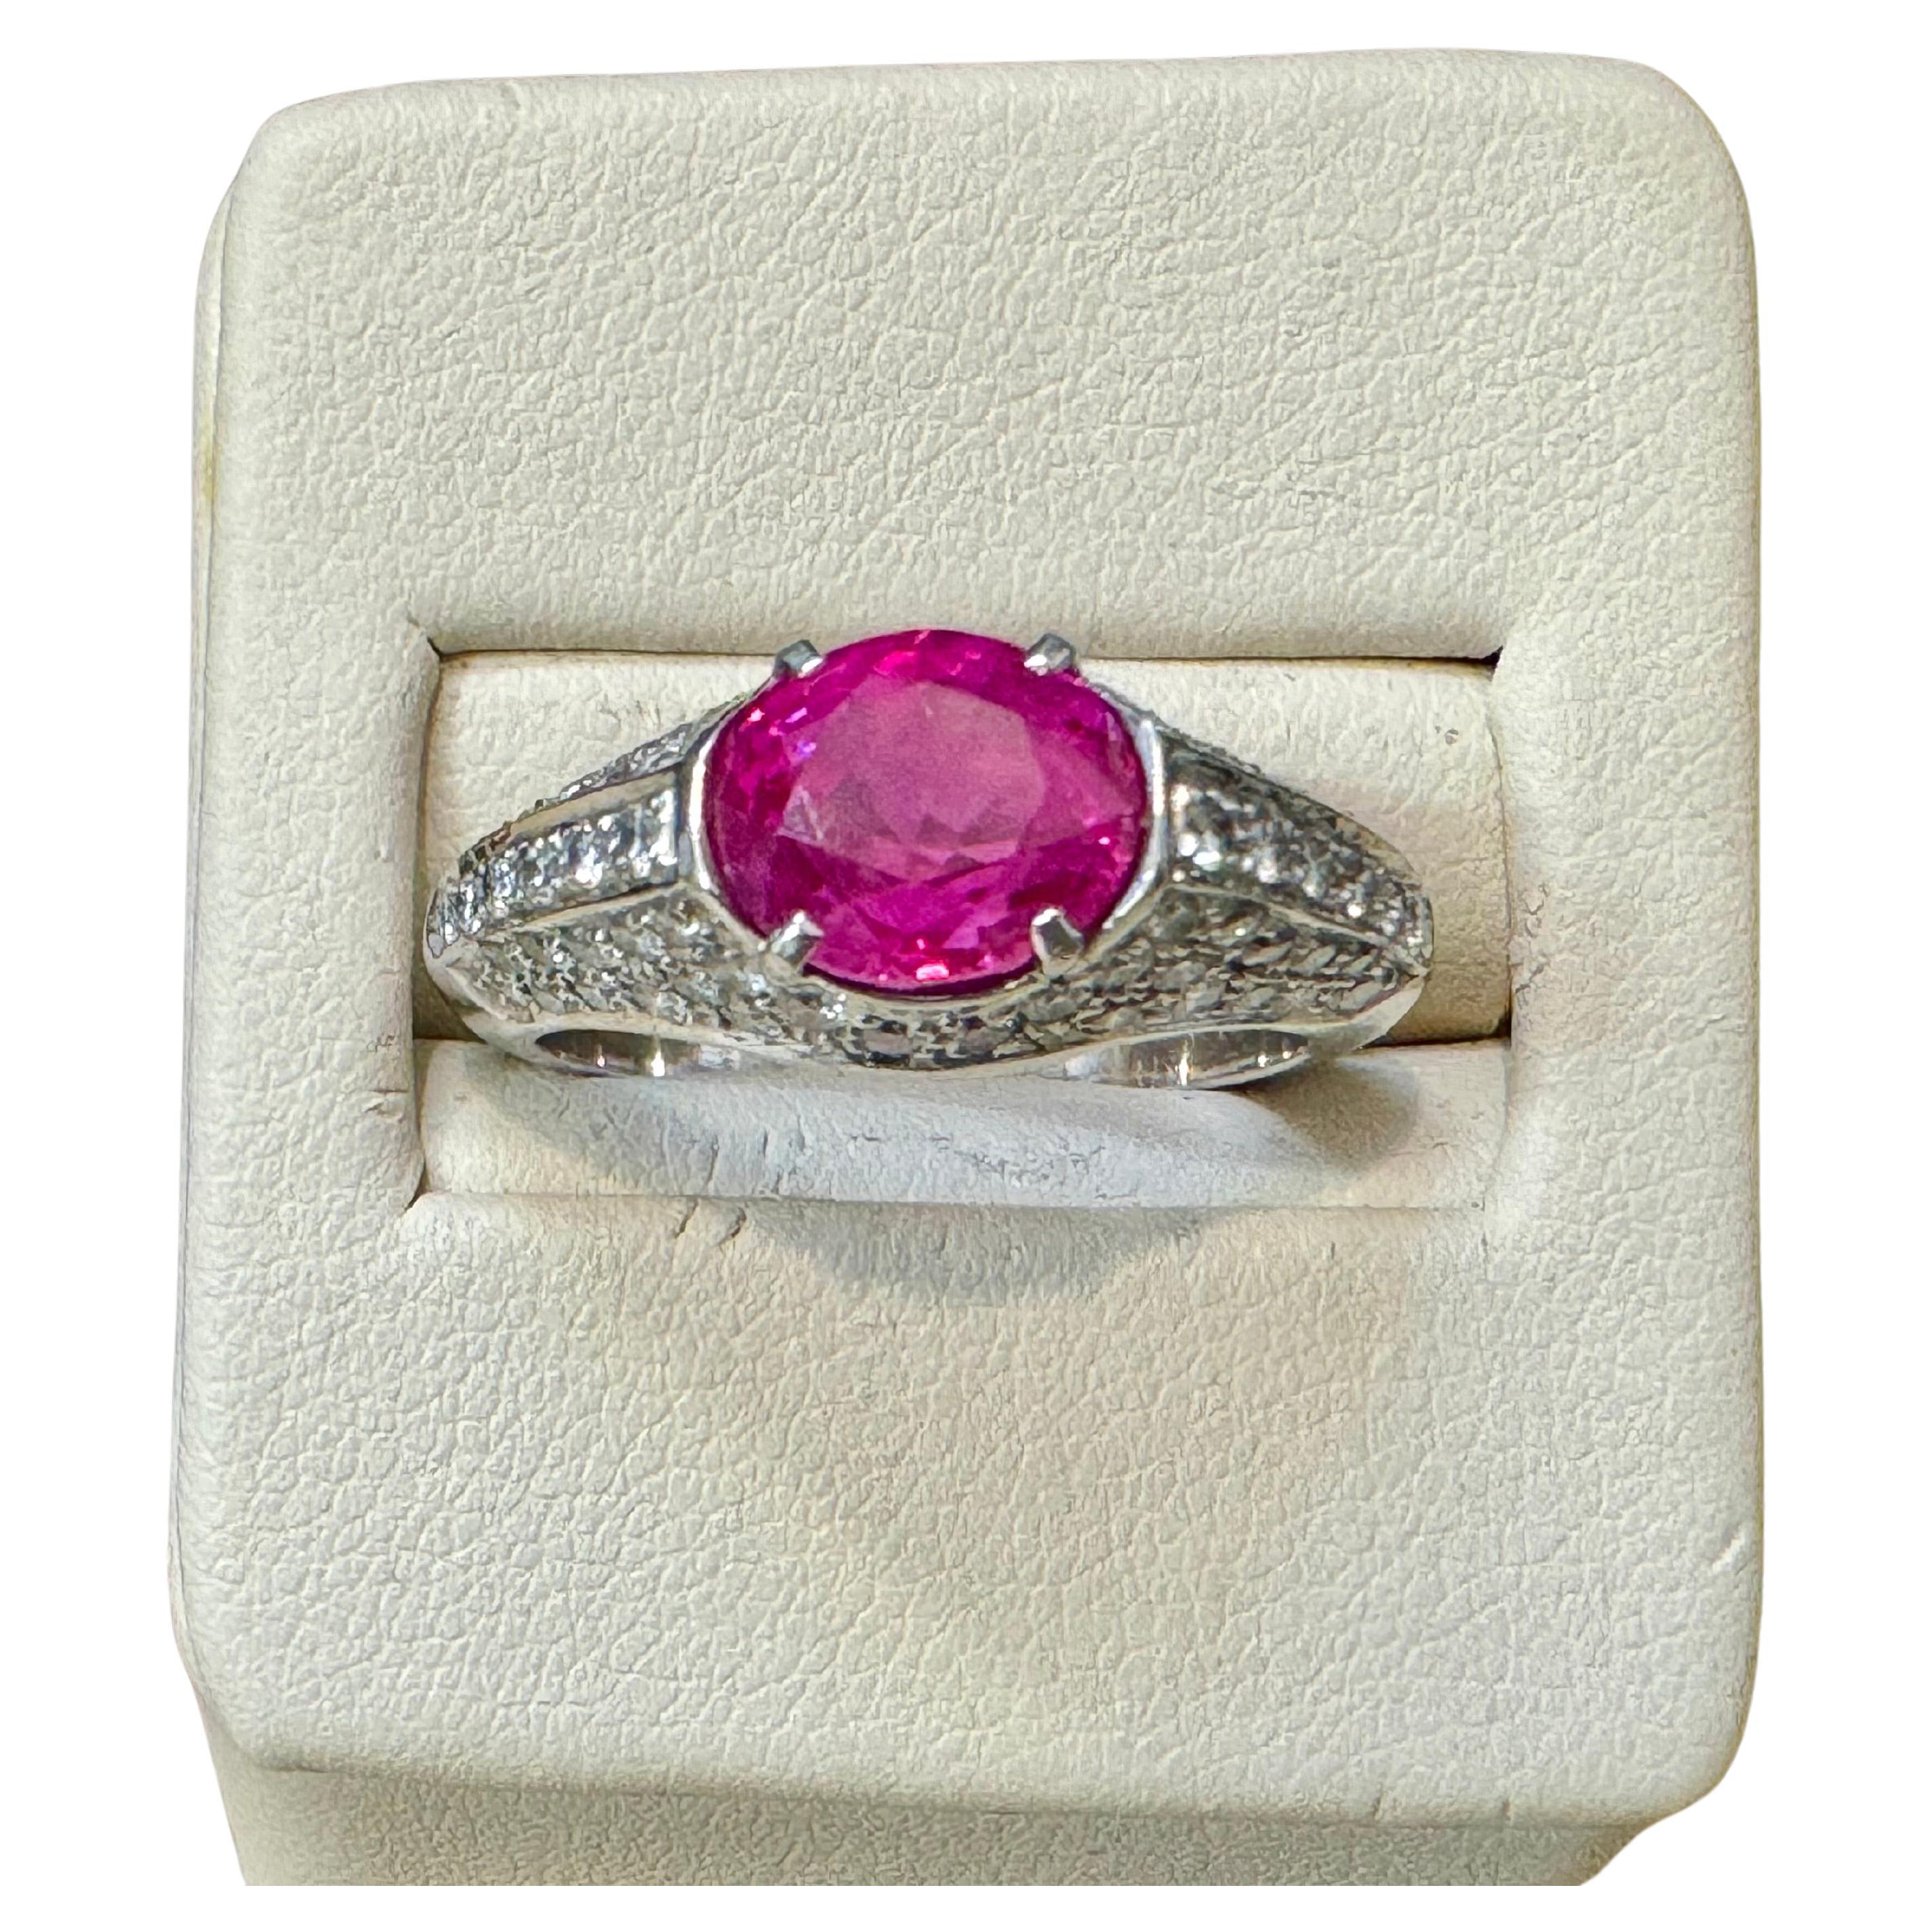 GIA Certified 2 Ct Natural Pink Sapphire & 2 Ct Pave Diamond Ring in Platinum